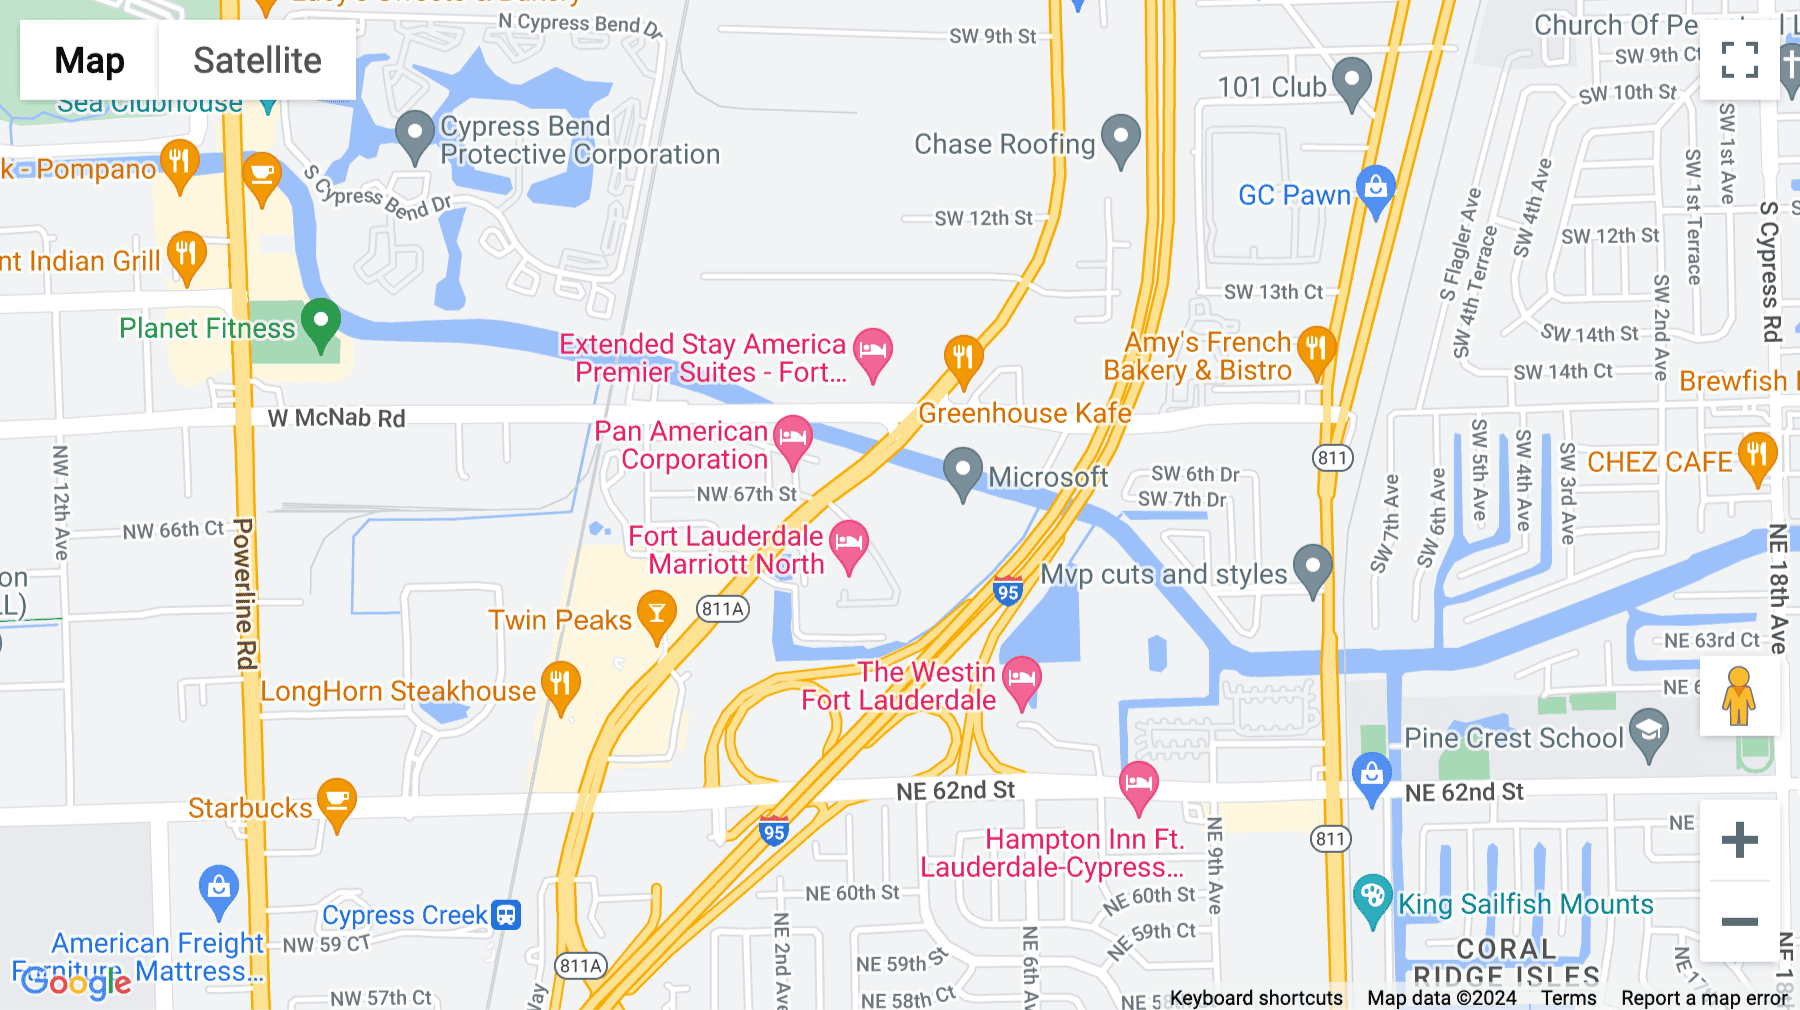 Click for interative map of 6750 N. Andrews Avenue, Suite 200, Fort Lauderdale